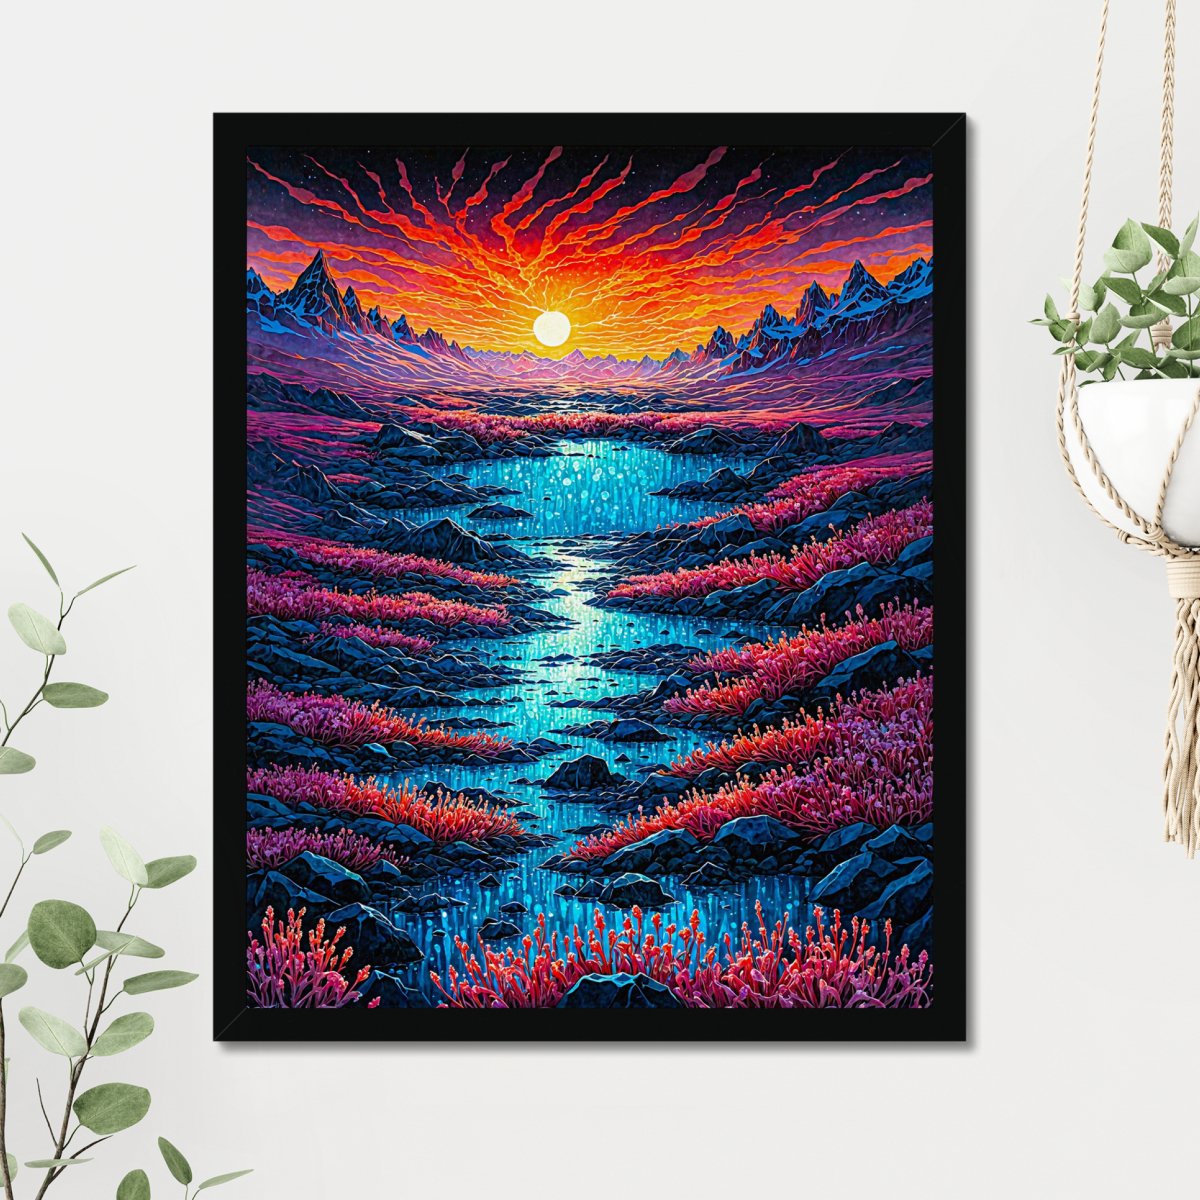 Exotic lands - Art print - Poster - Ever colorful